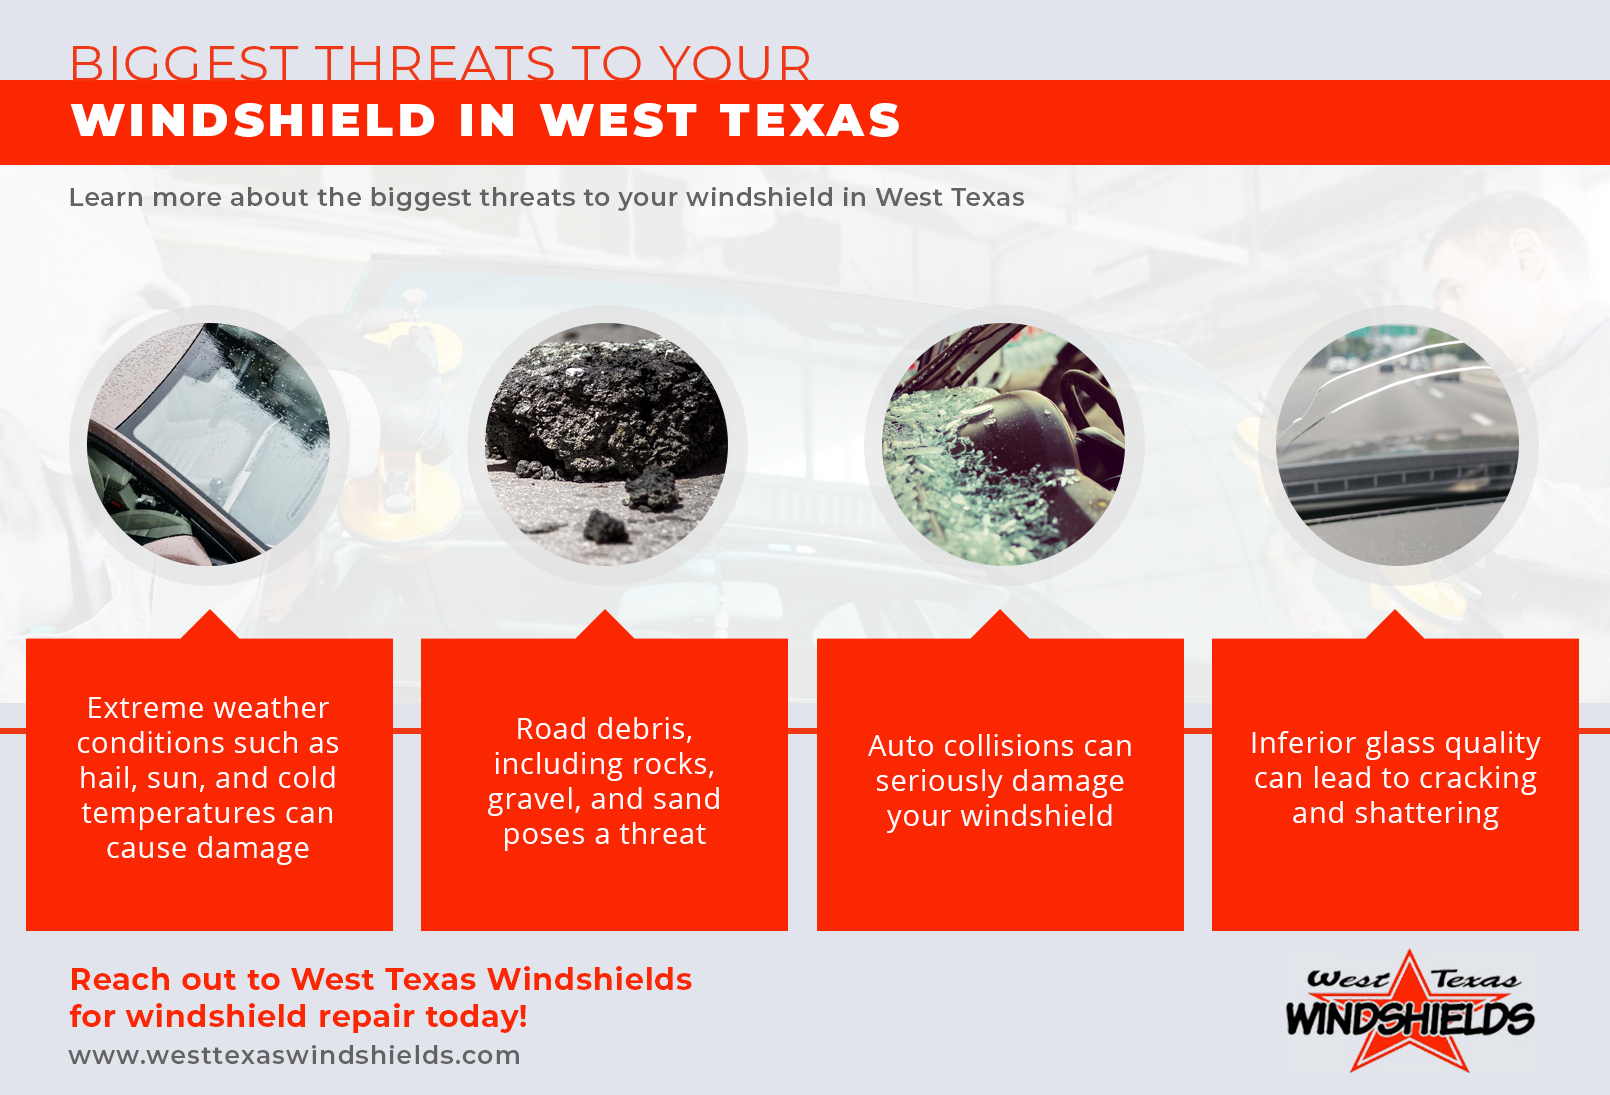 Biggest Threats to Your Windshield in West Texas